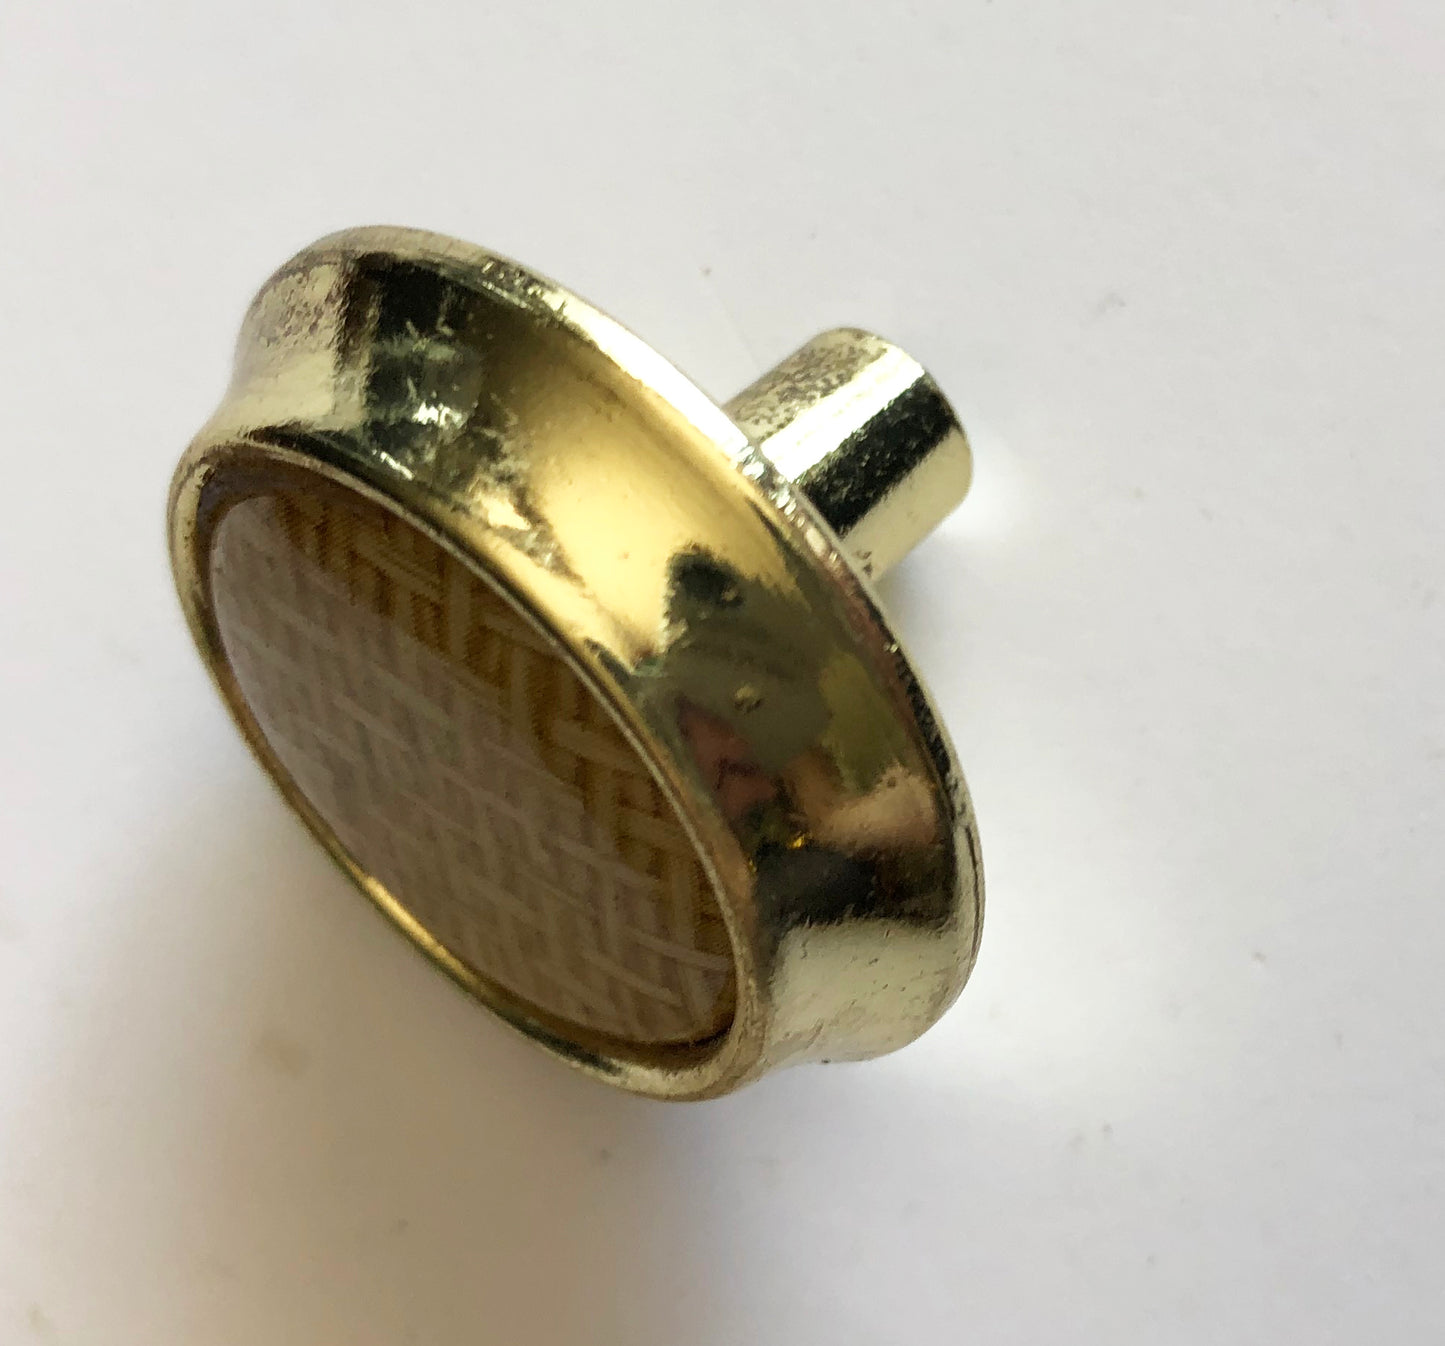 Polished Brass Inset Knobs